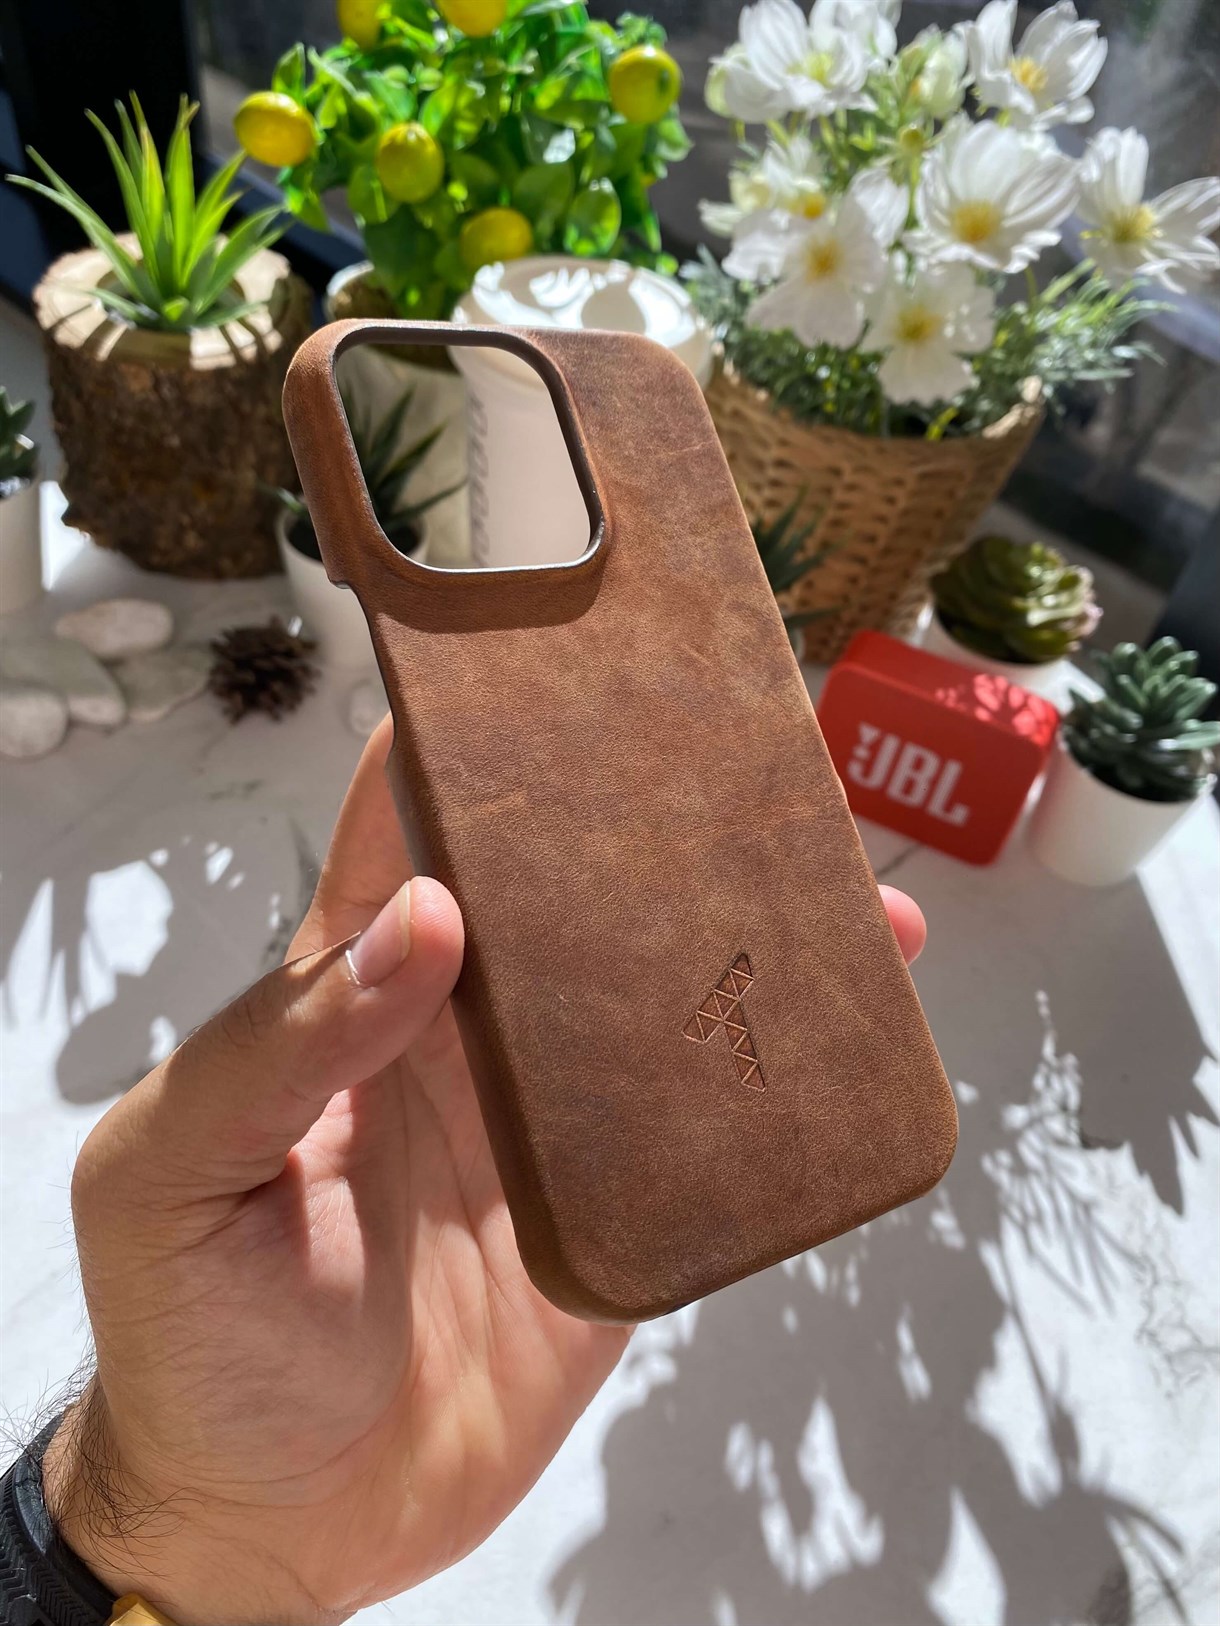 İPHONE 13 PRO MAX BROWN LEATHER PHONE CASE